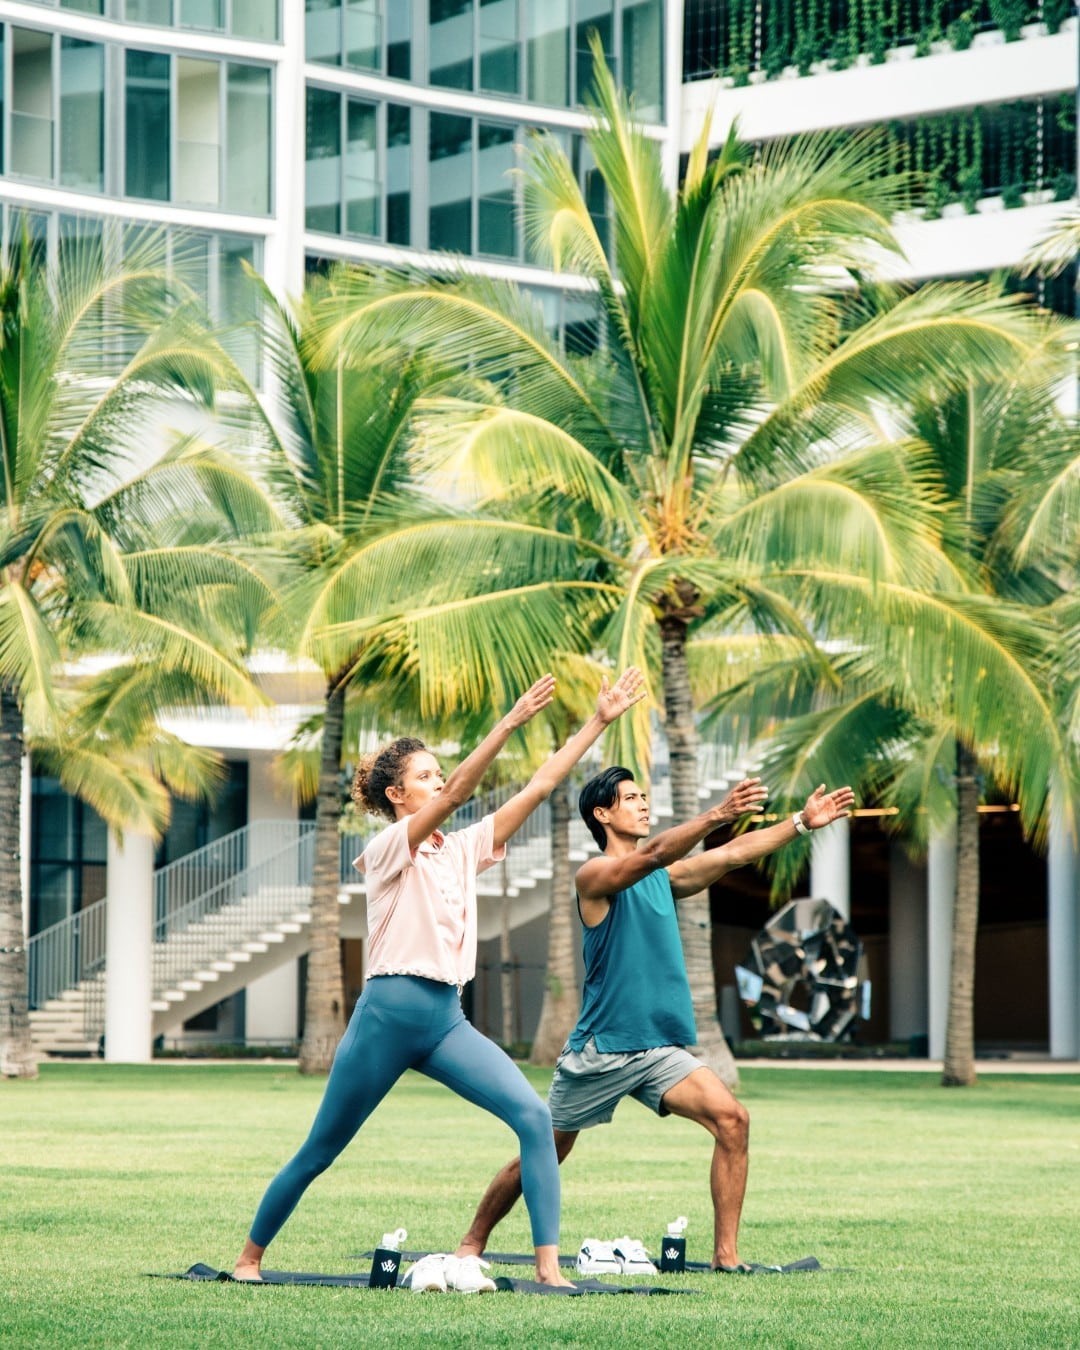 Experience tropical urban living at Kōʻula where neighboring Victoria Ward Park acts as an extension of your home. Learn more about the lush green spaces surrounding these move-in ready residences at the link in our bio.